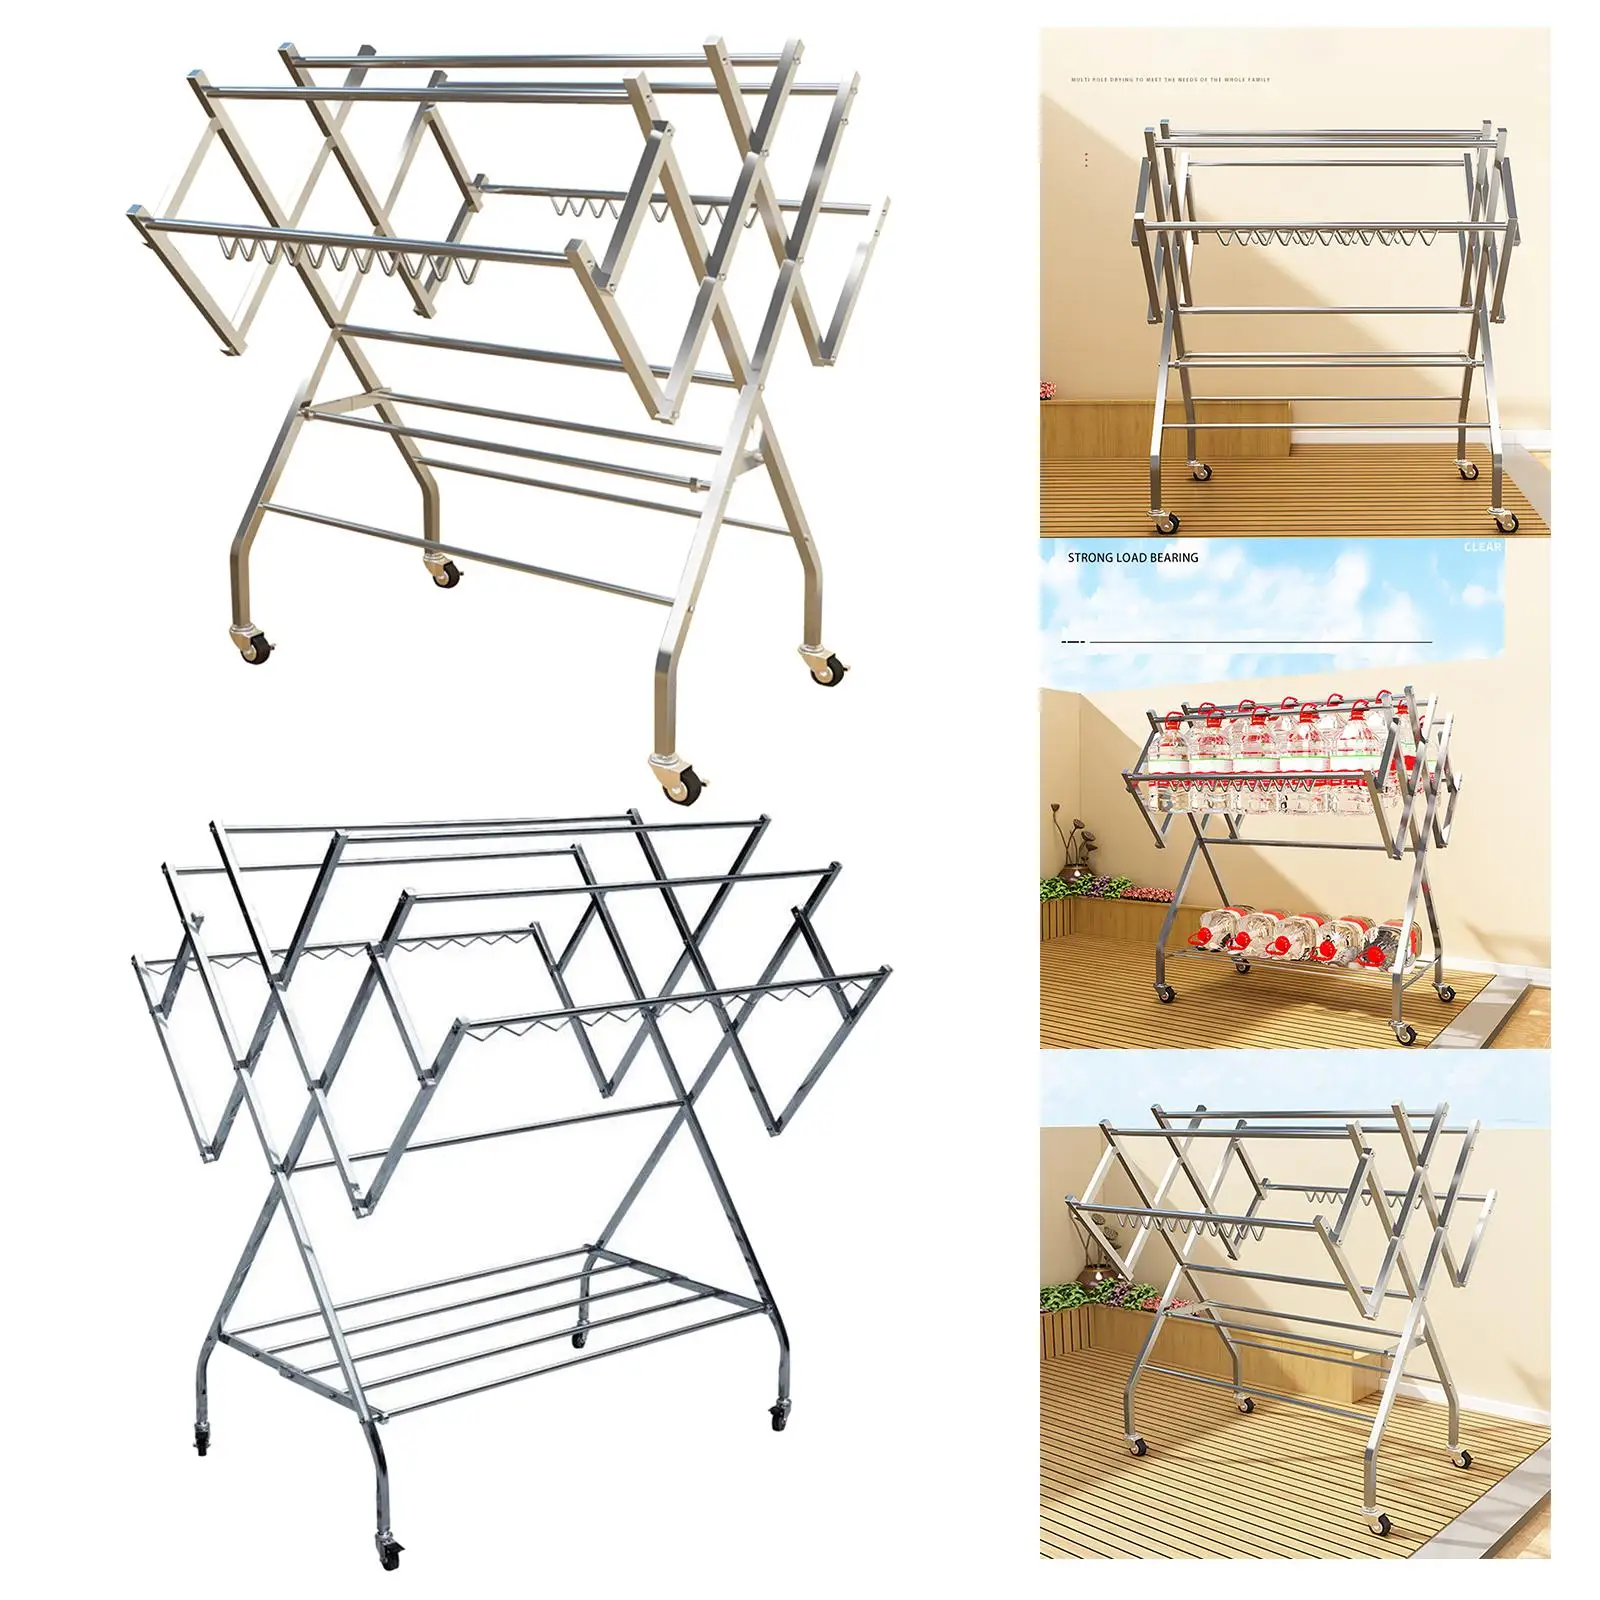 Folding Clothes Drying Rack Multifunctional Laundry Rack Space Saving Easy Storage Floor Drying Rack for Quilts Shoes Bed Sheet